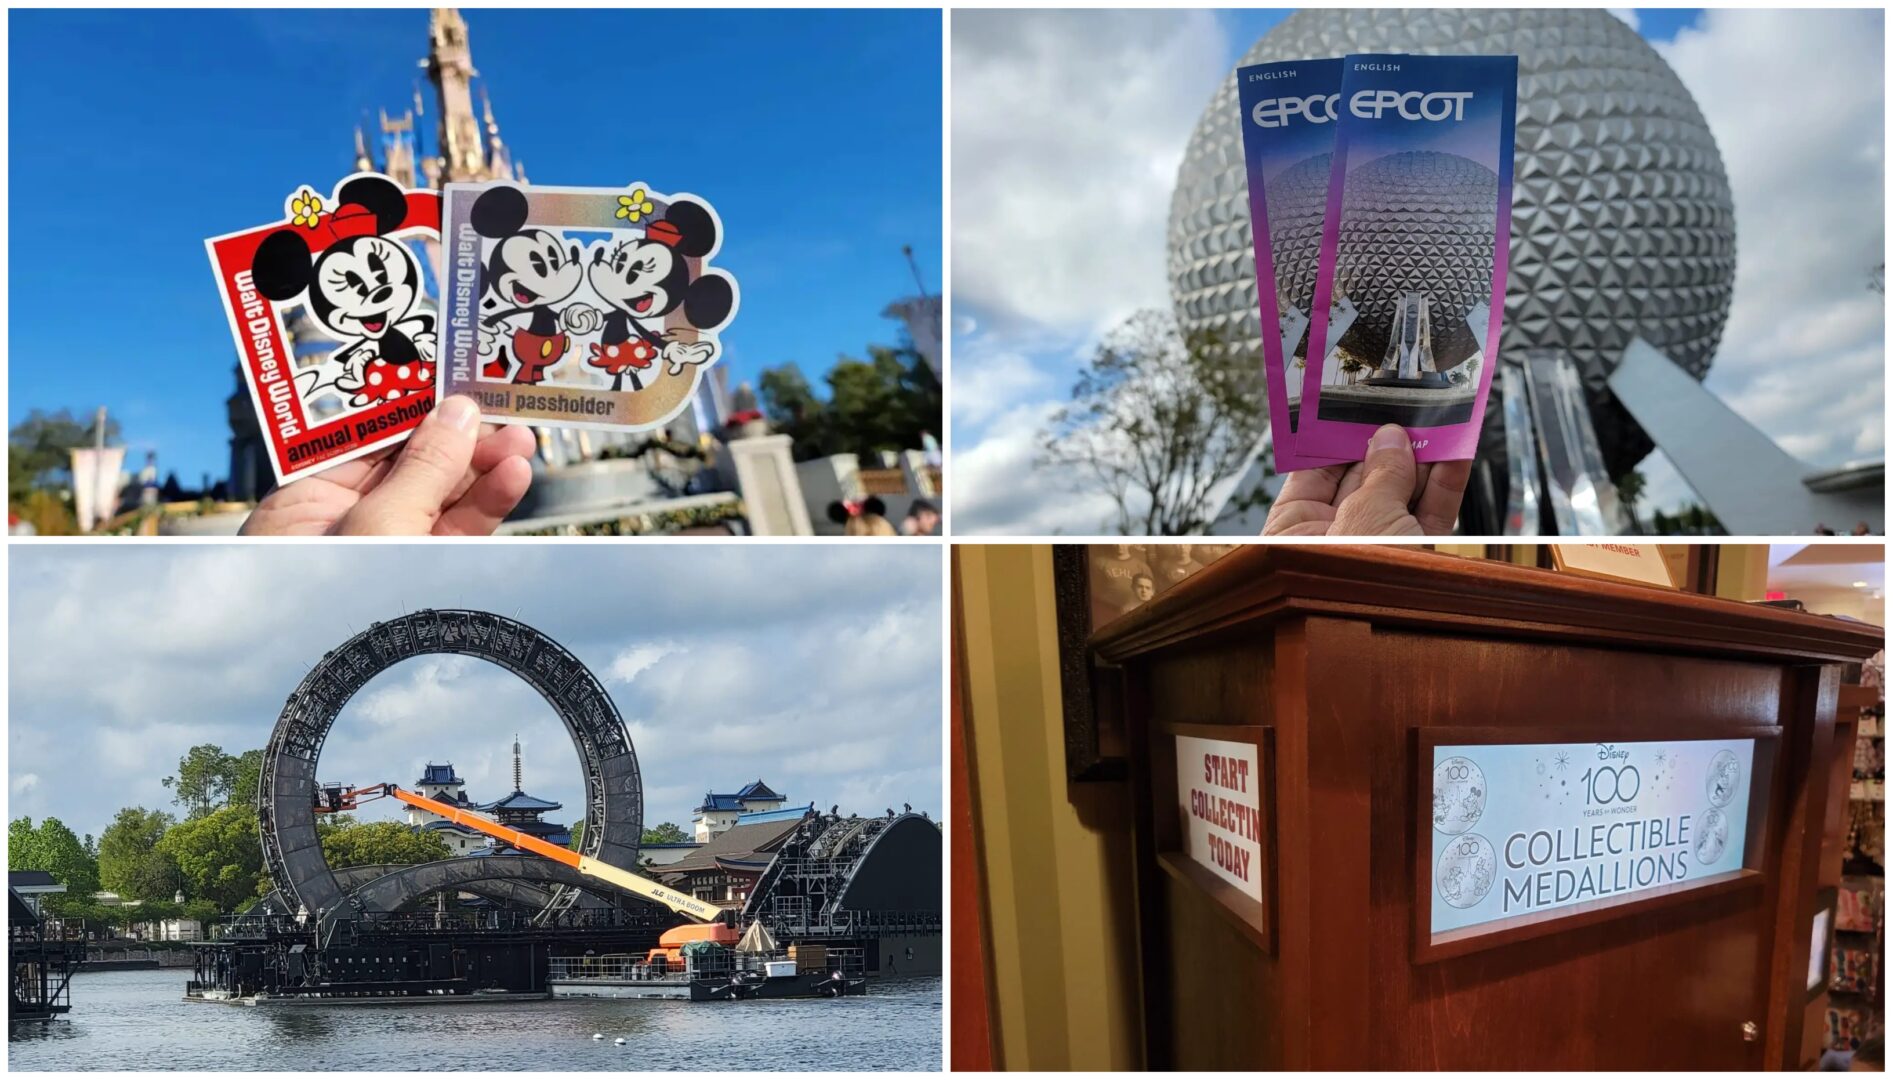 Disney News Highlights: Disney World Annual Passes Returning, Water Tacos and Stargate Removal Begin, DisneyBand + Coming to DCL, Shades of Green Walkway Being Closed